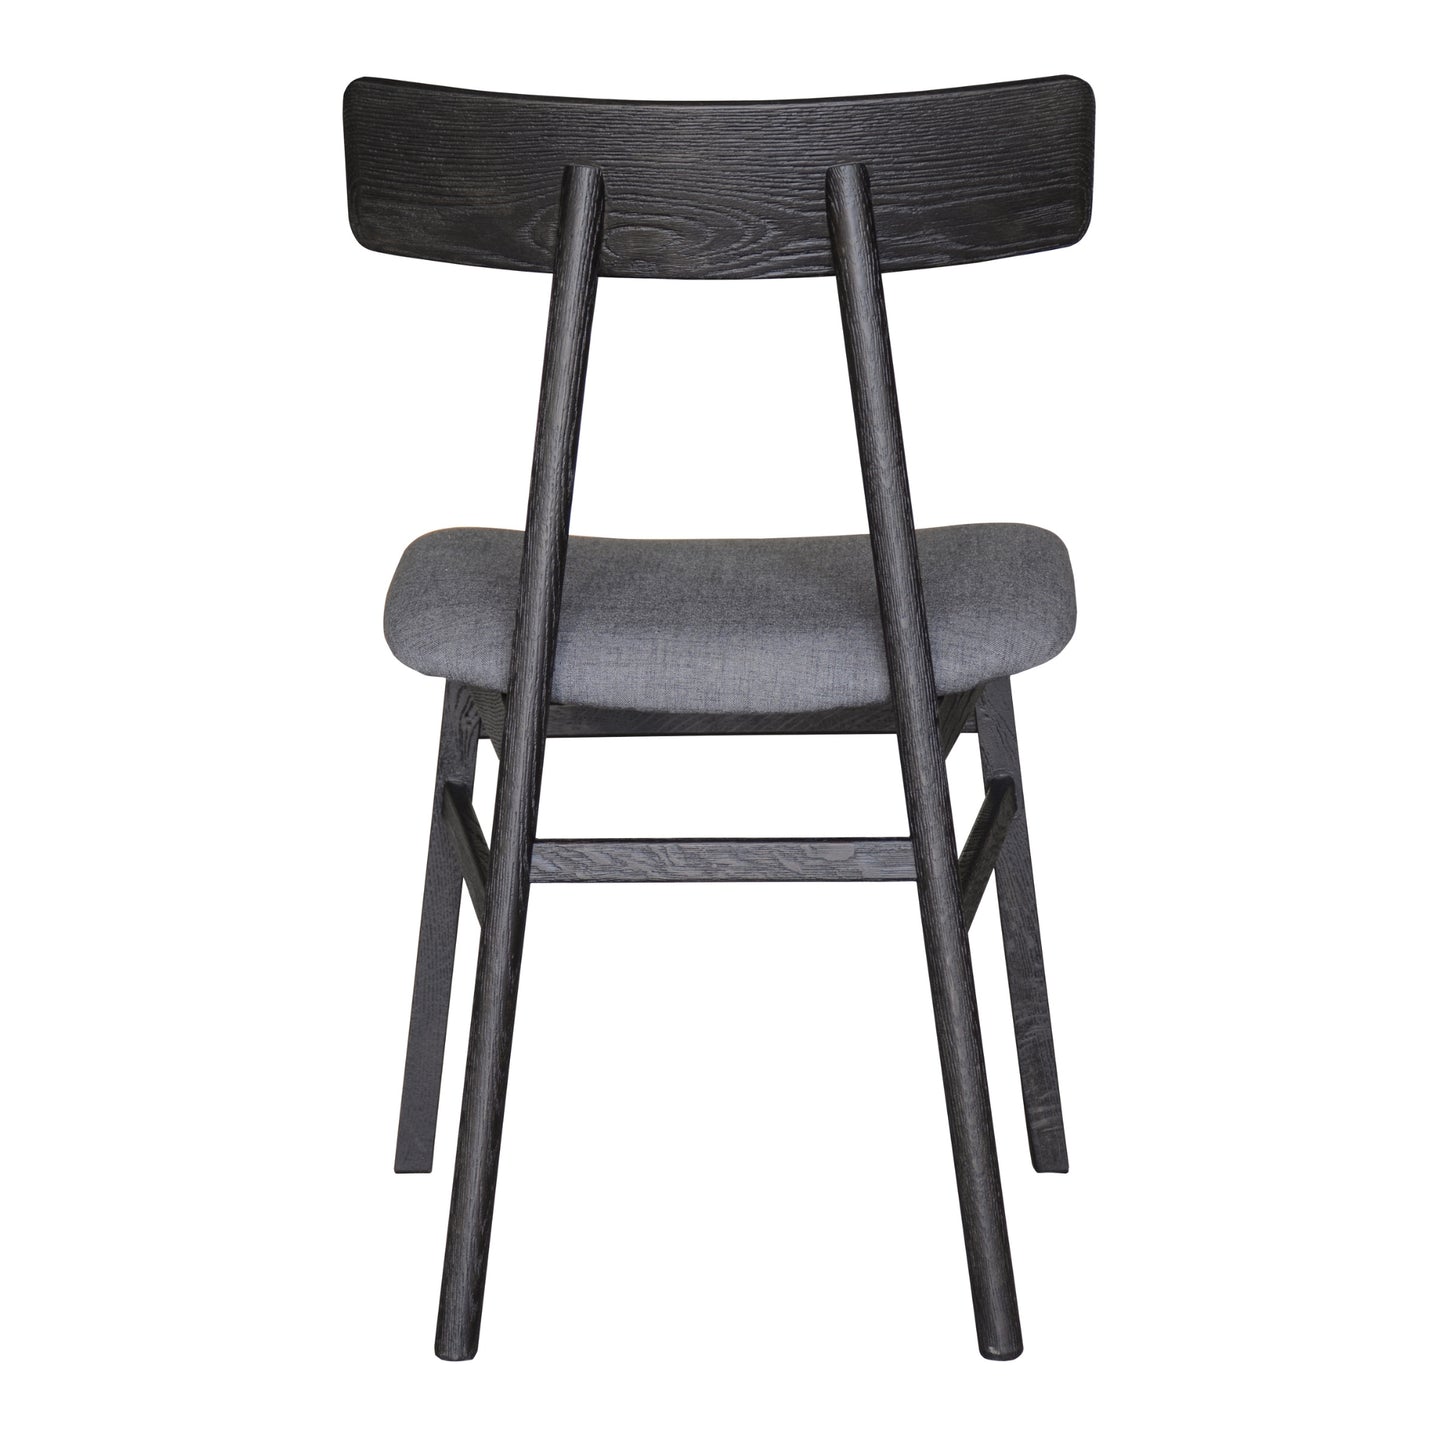 Claire Dining Chair Set of 6 Solid Oak Wood Fabric Seat Furniture - Black